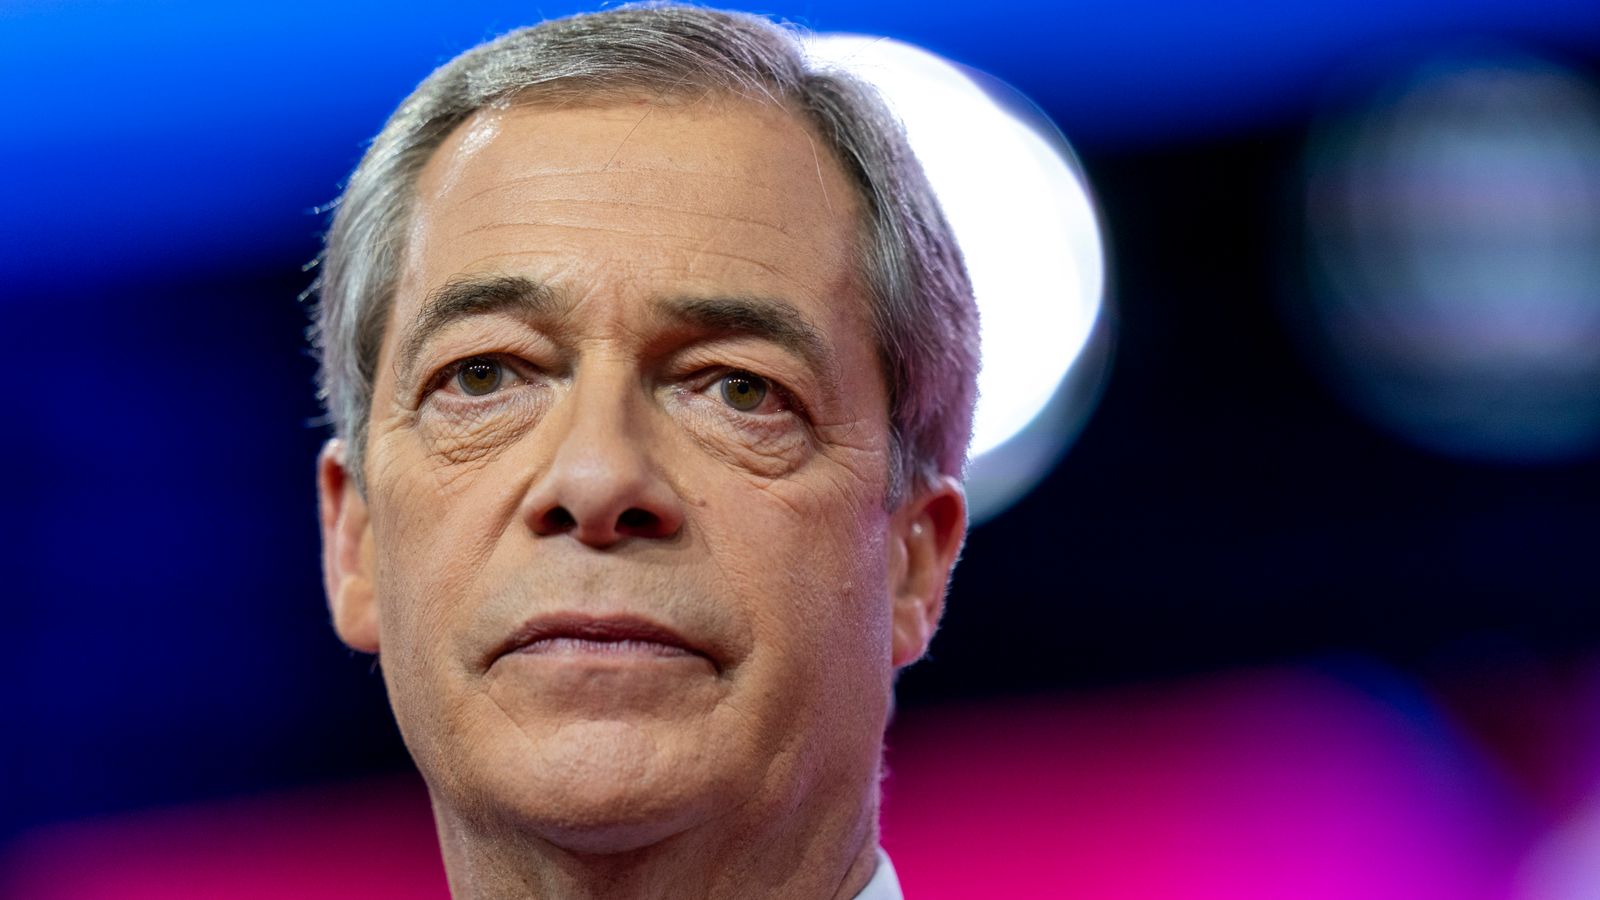 Farage to seek millions in damages from NatWest and former CEO Rose